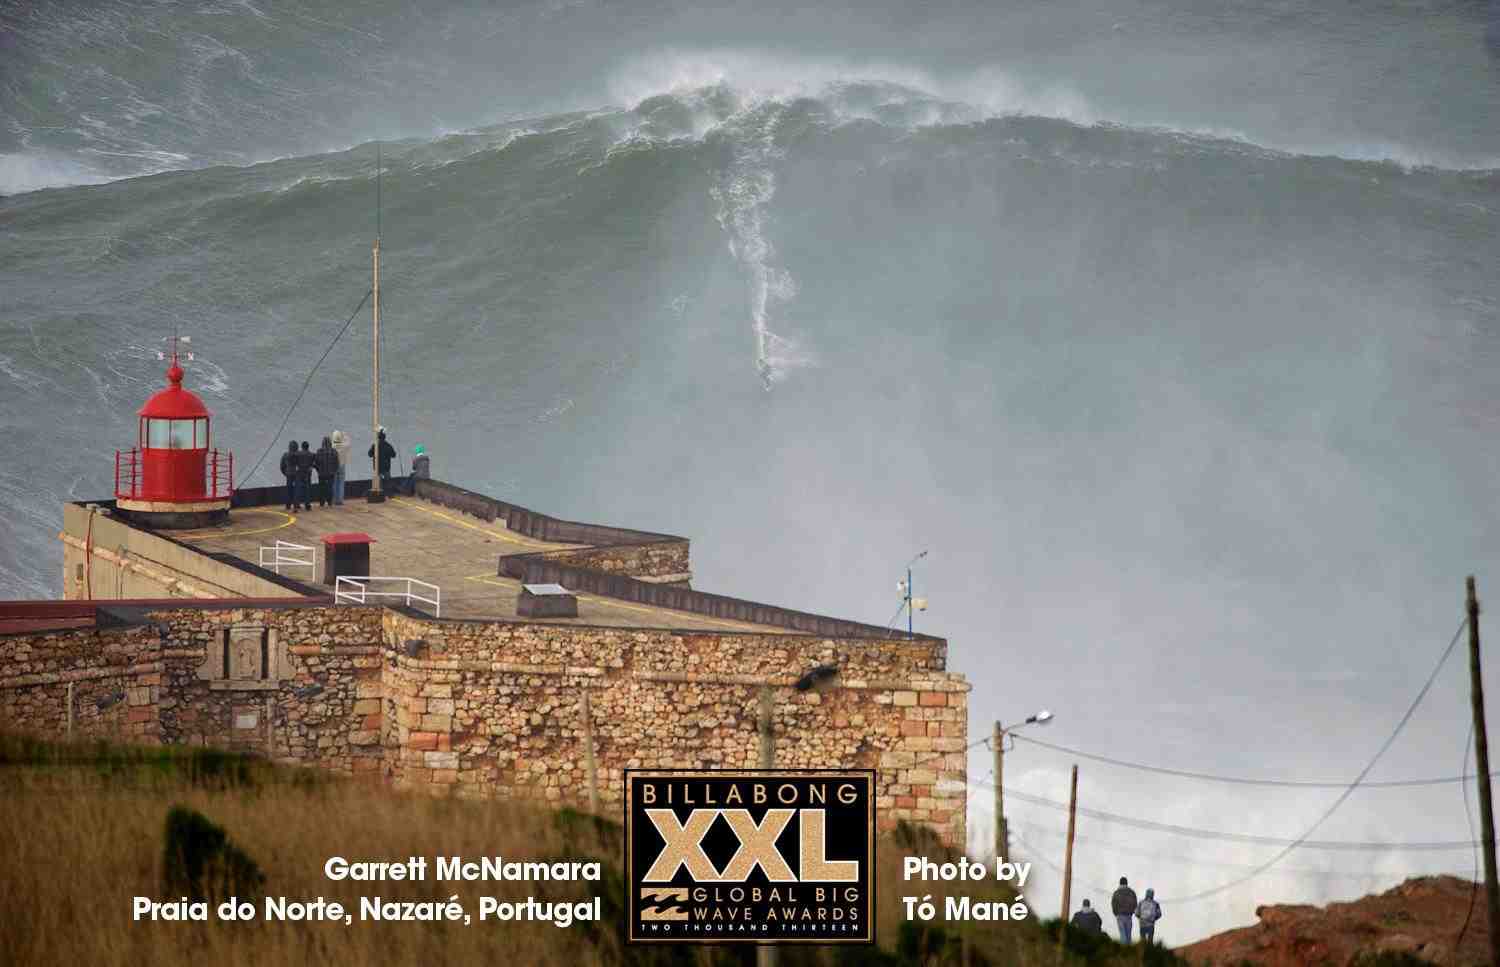 How much do big wave surfers make?